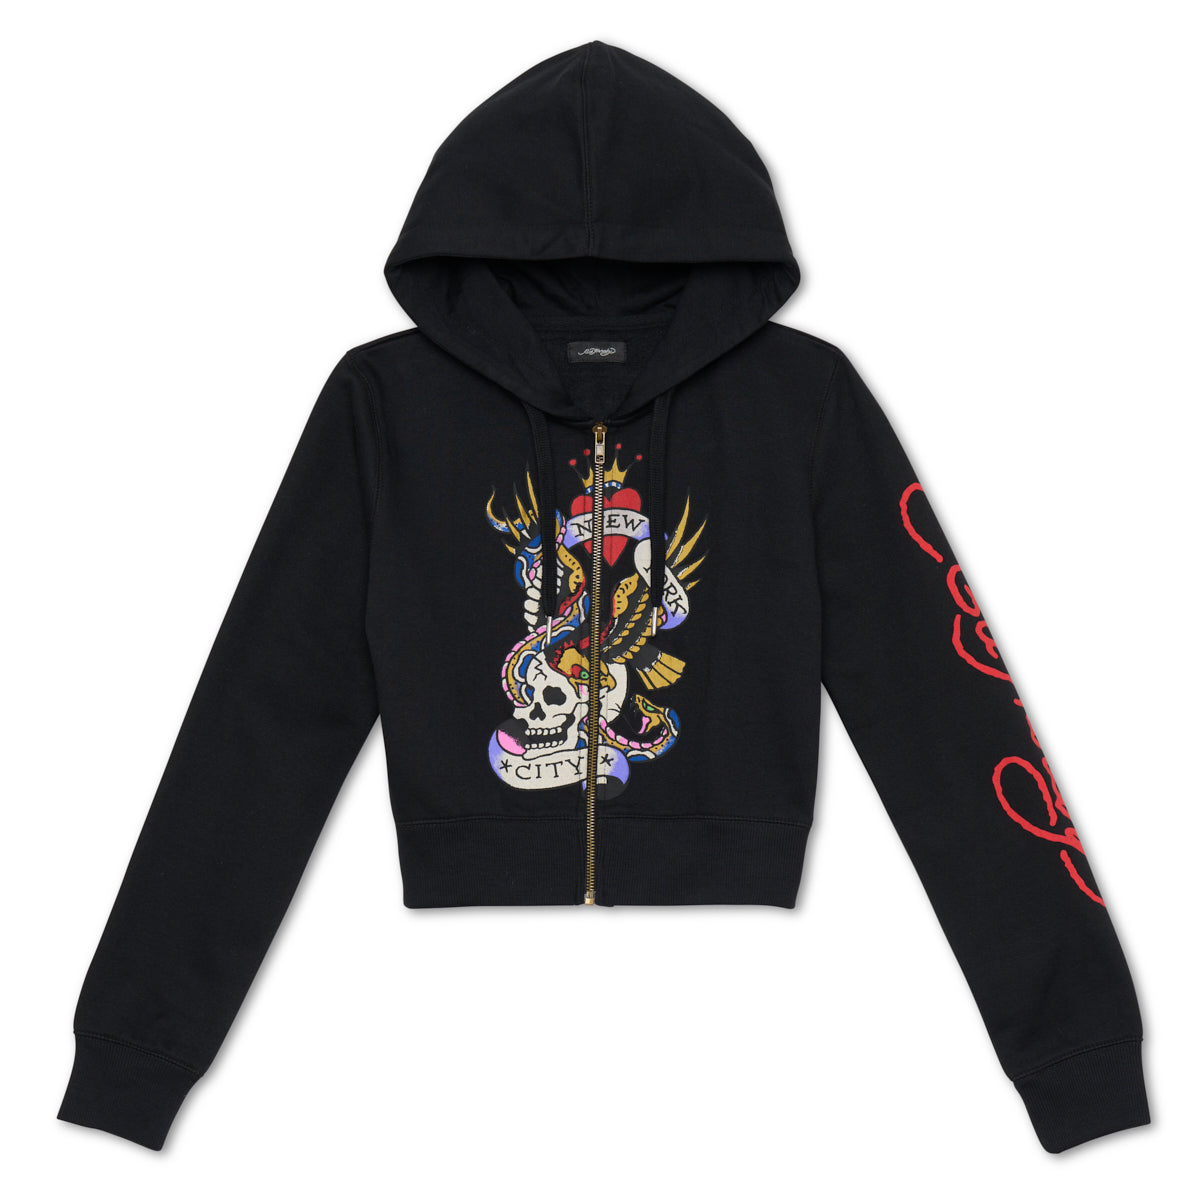 Official Ed Hardy Merch Store Flame Skull Tee EdHardy Apparel